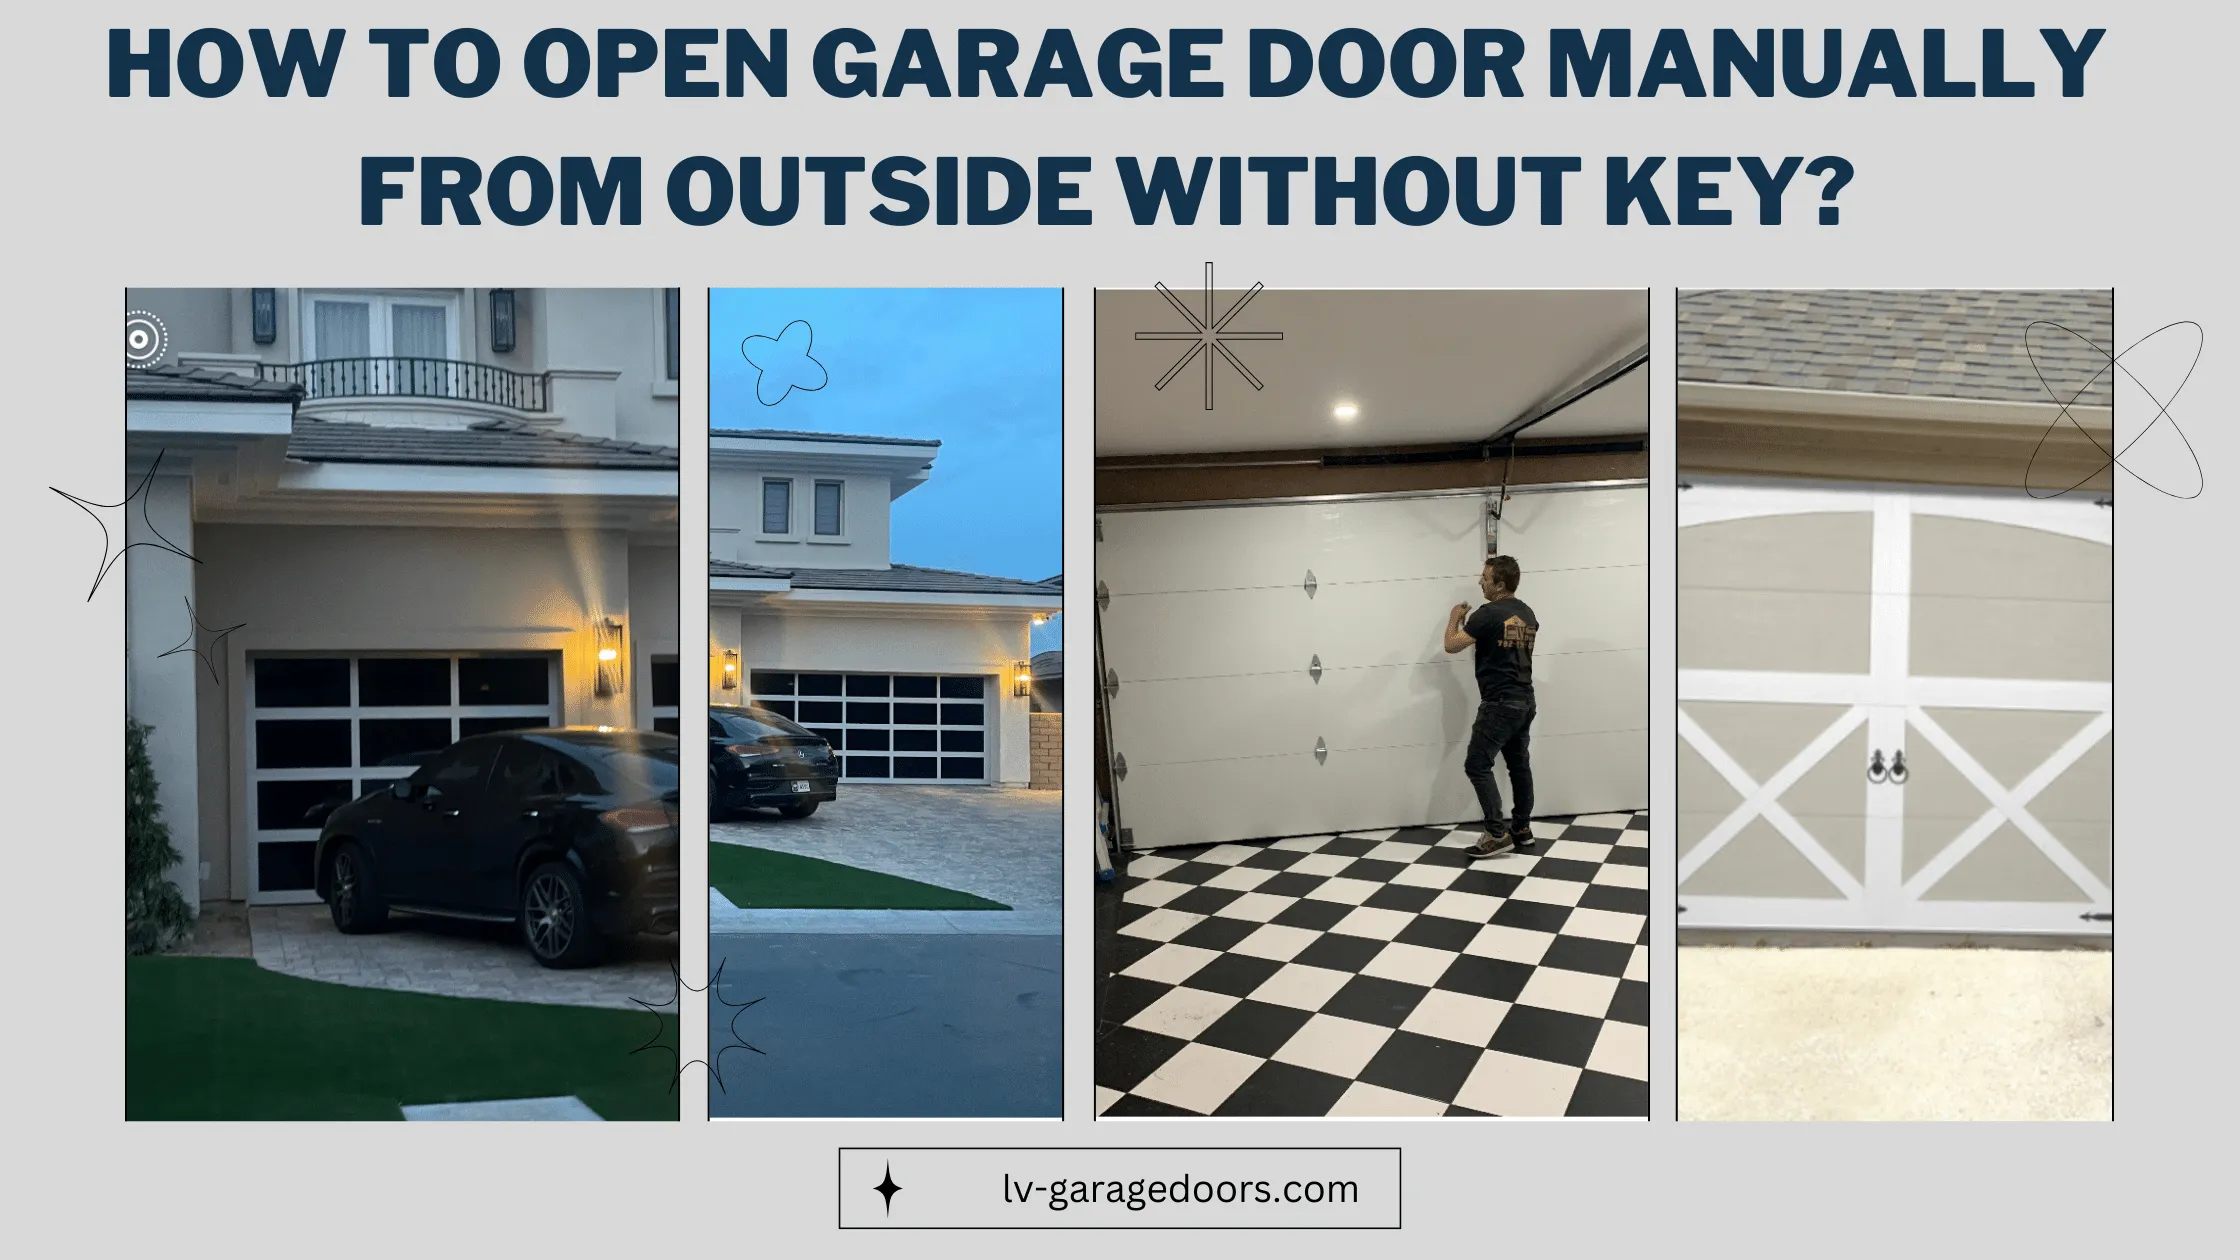 How To Open Garage Door Manually From Outside Without Key